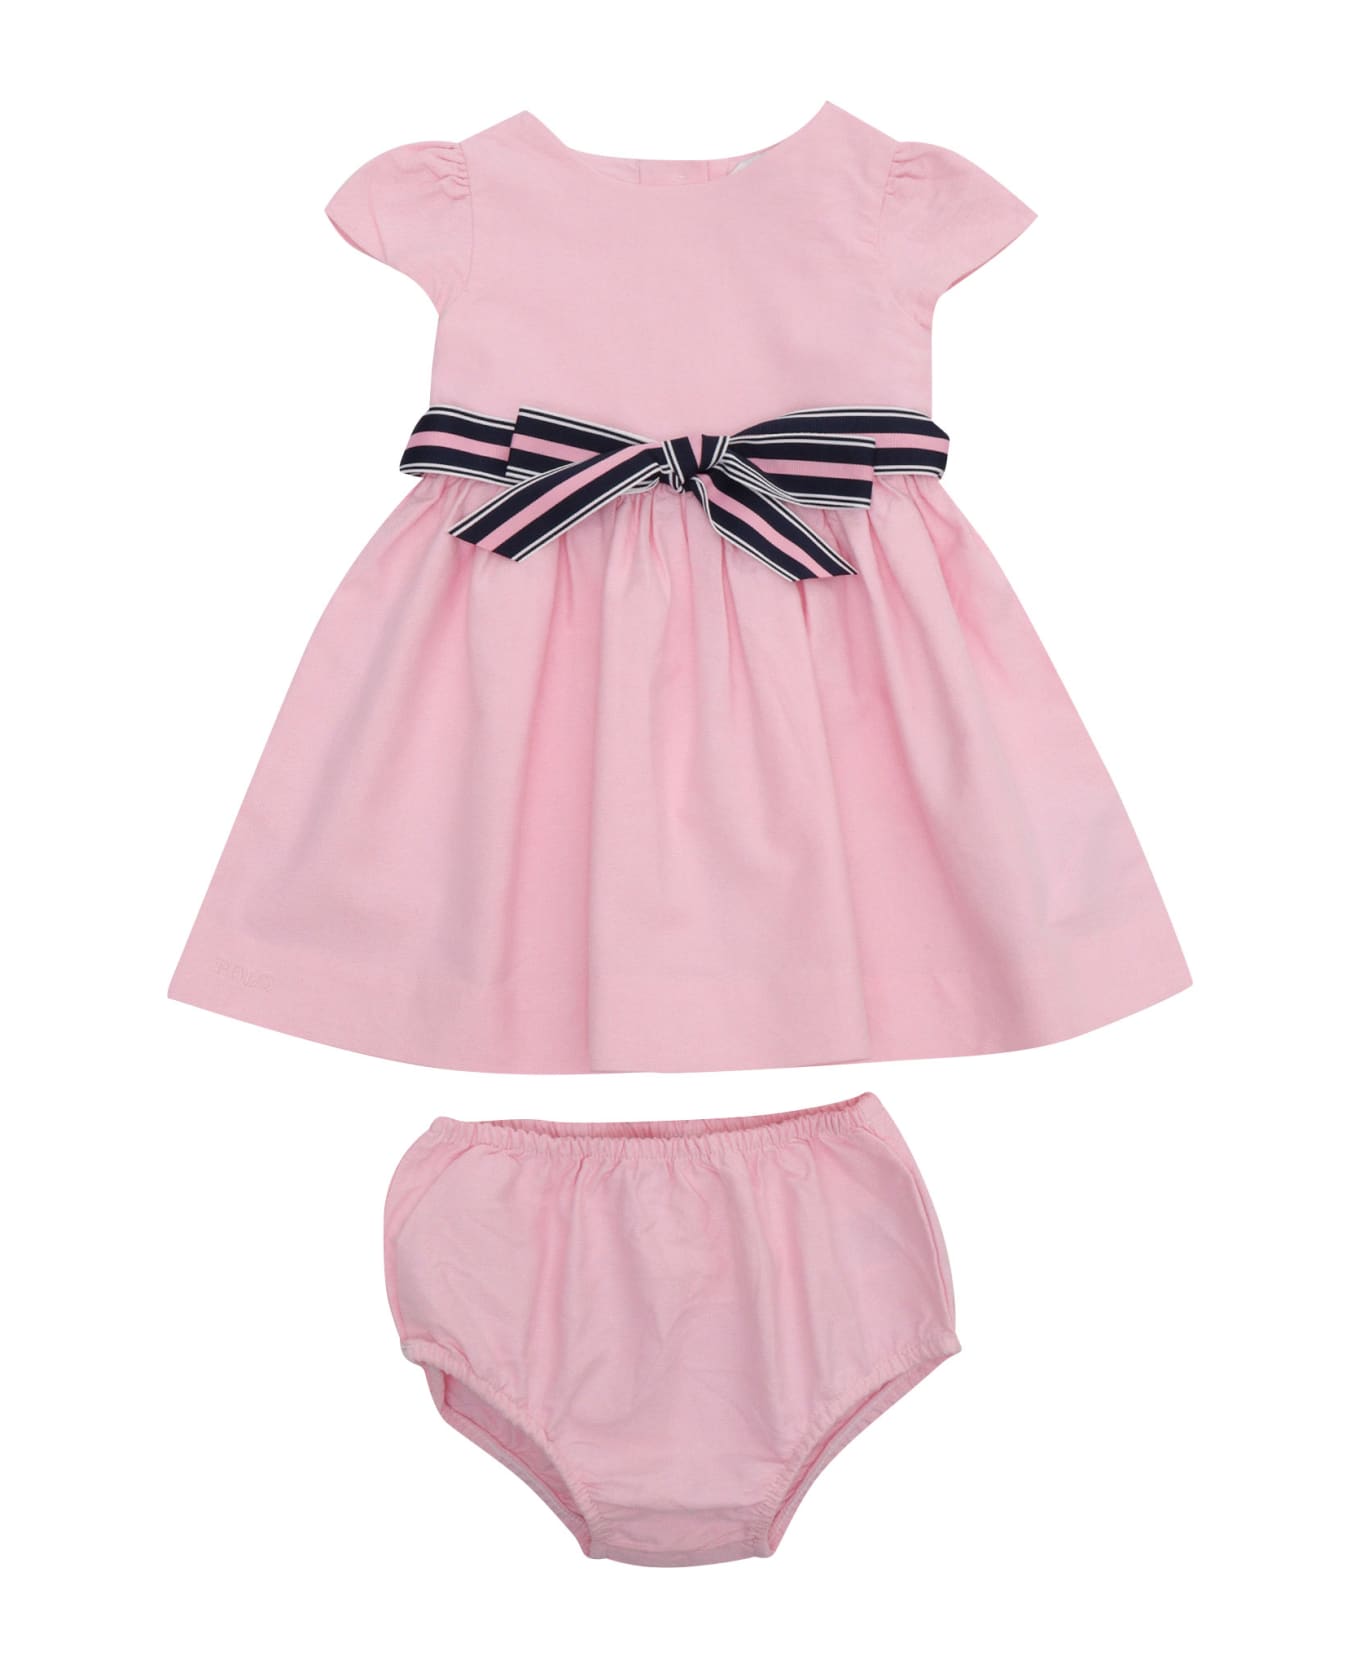 Polo Ralph Lauren Pink Dress With Bow - PINK ワンピース＆ドレス